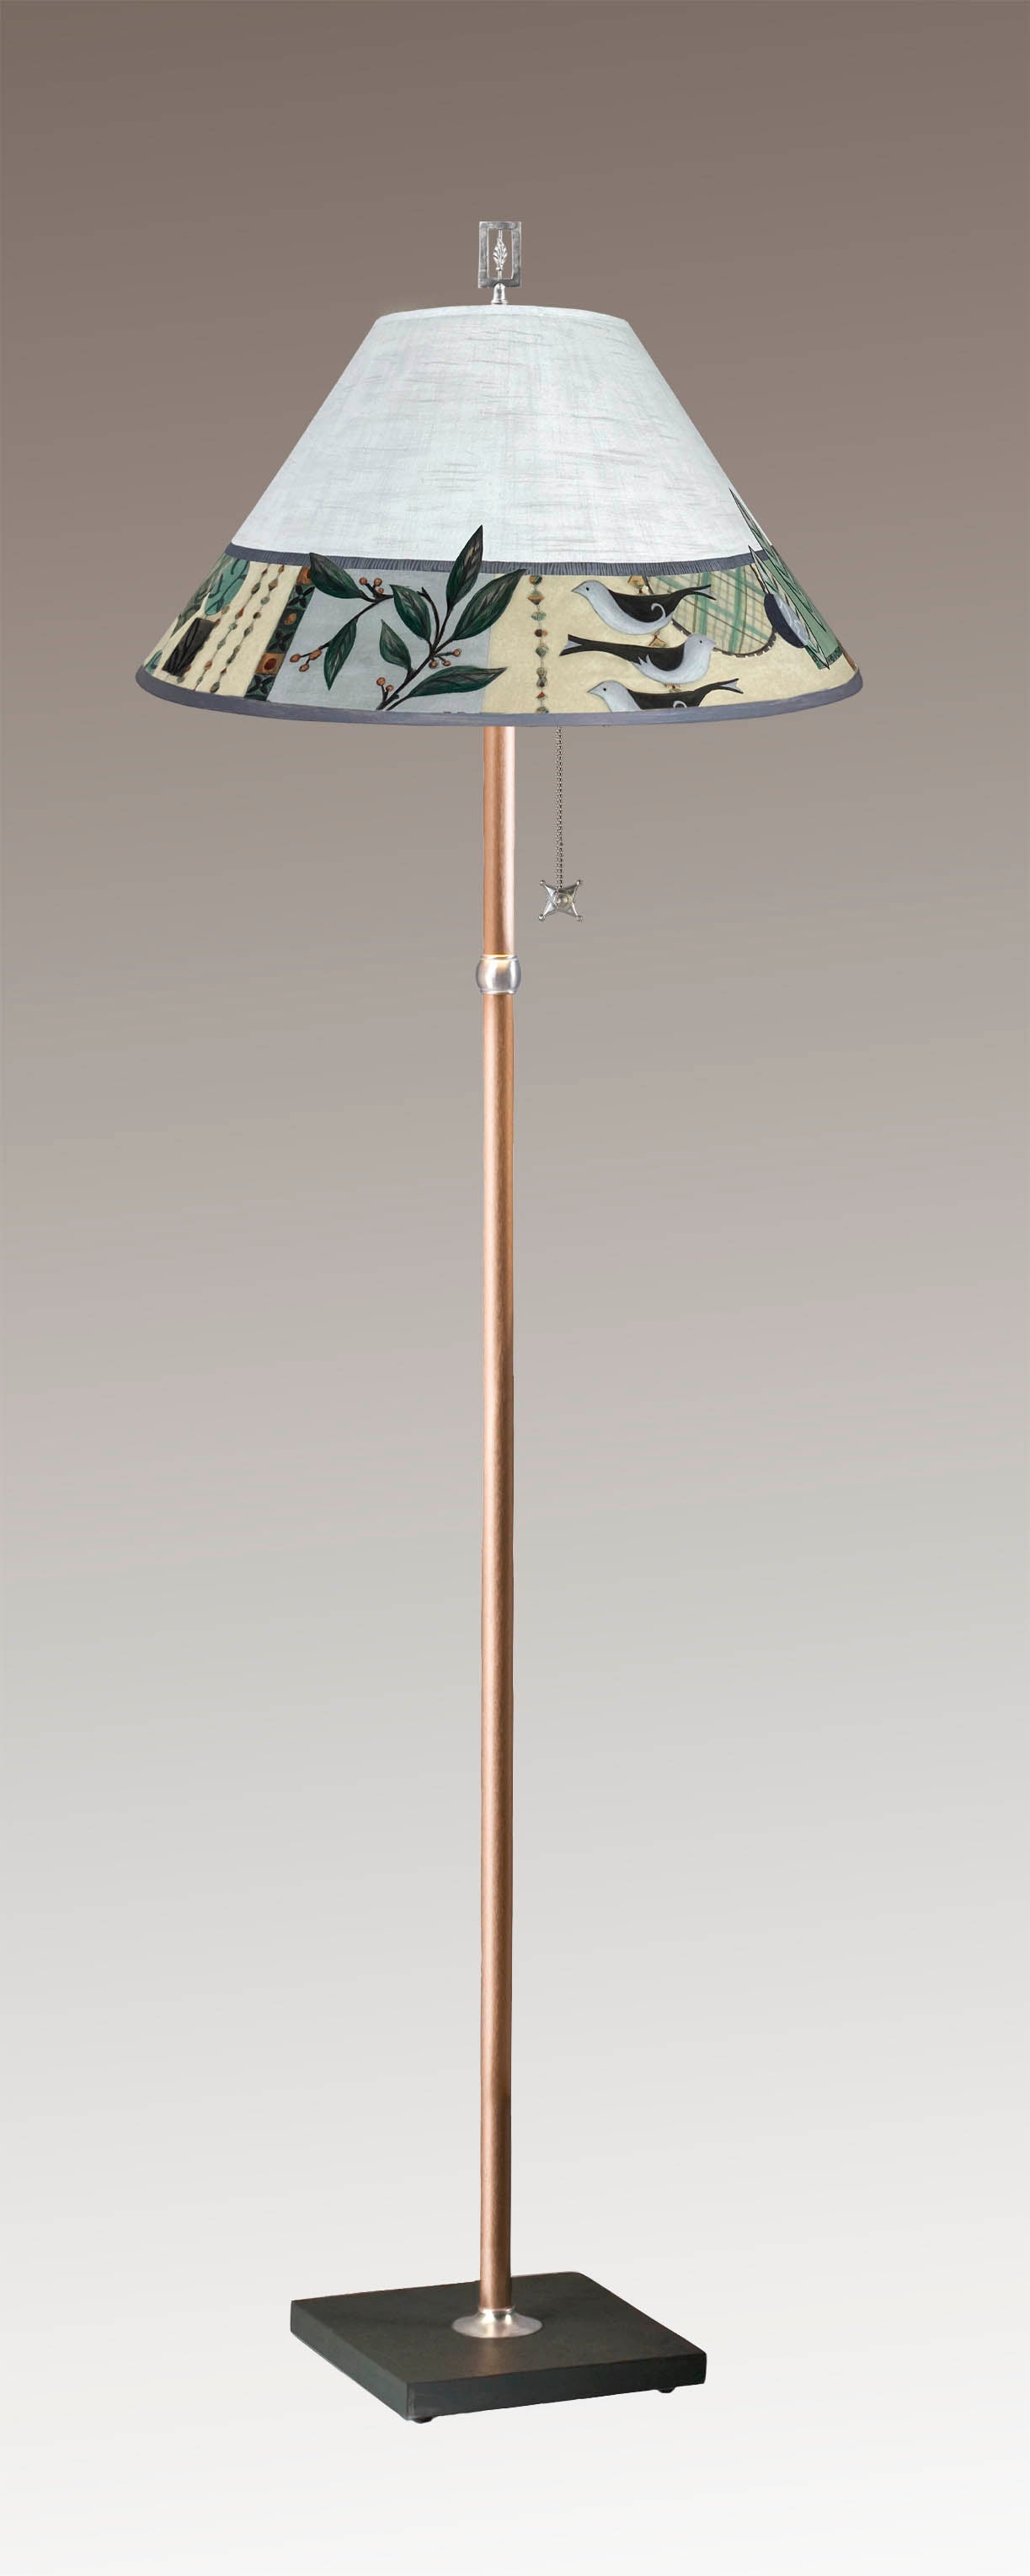 Janna Ugone & Co Floor Lamp Copper Floor Lamp with Large Conical Shade in New Capri Opal